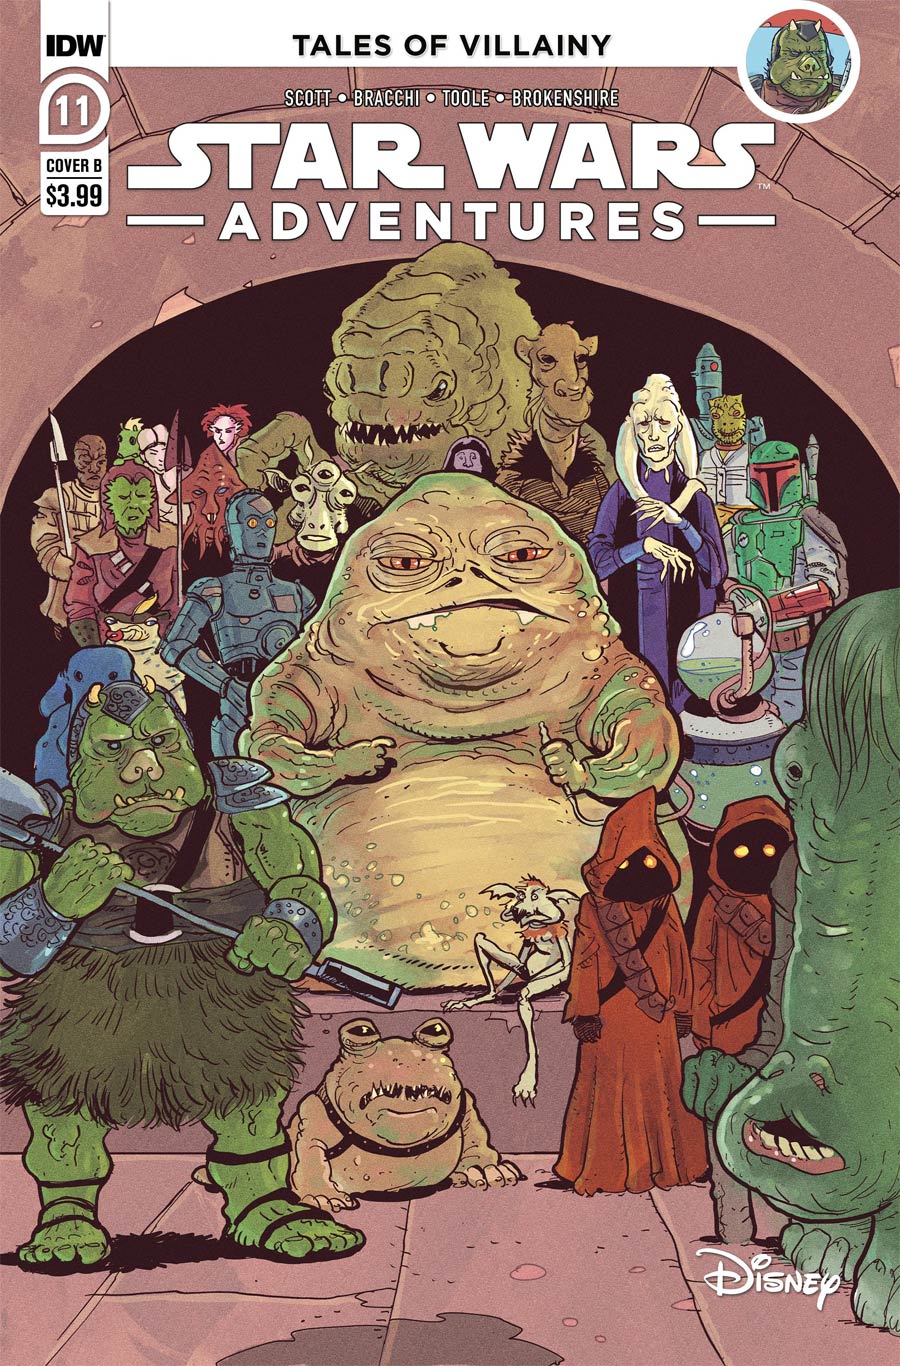 Star Wars Adventures Vol 2 #11 Cover B Variant Nick Brokenshire Cover